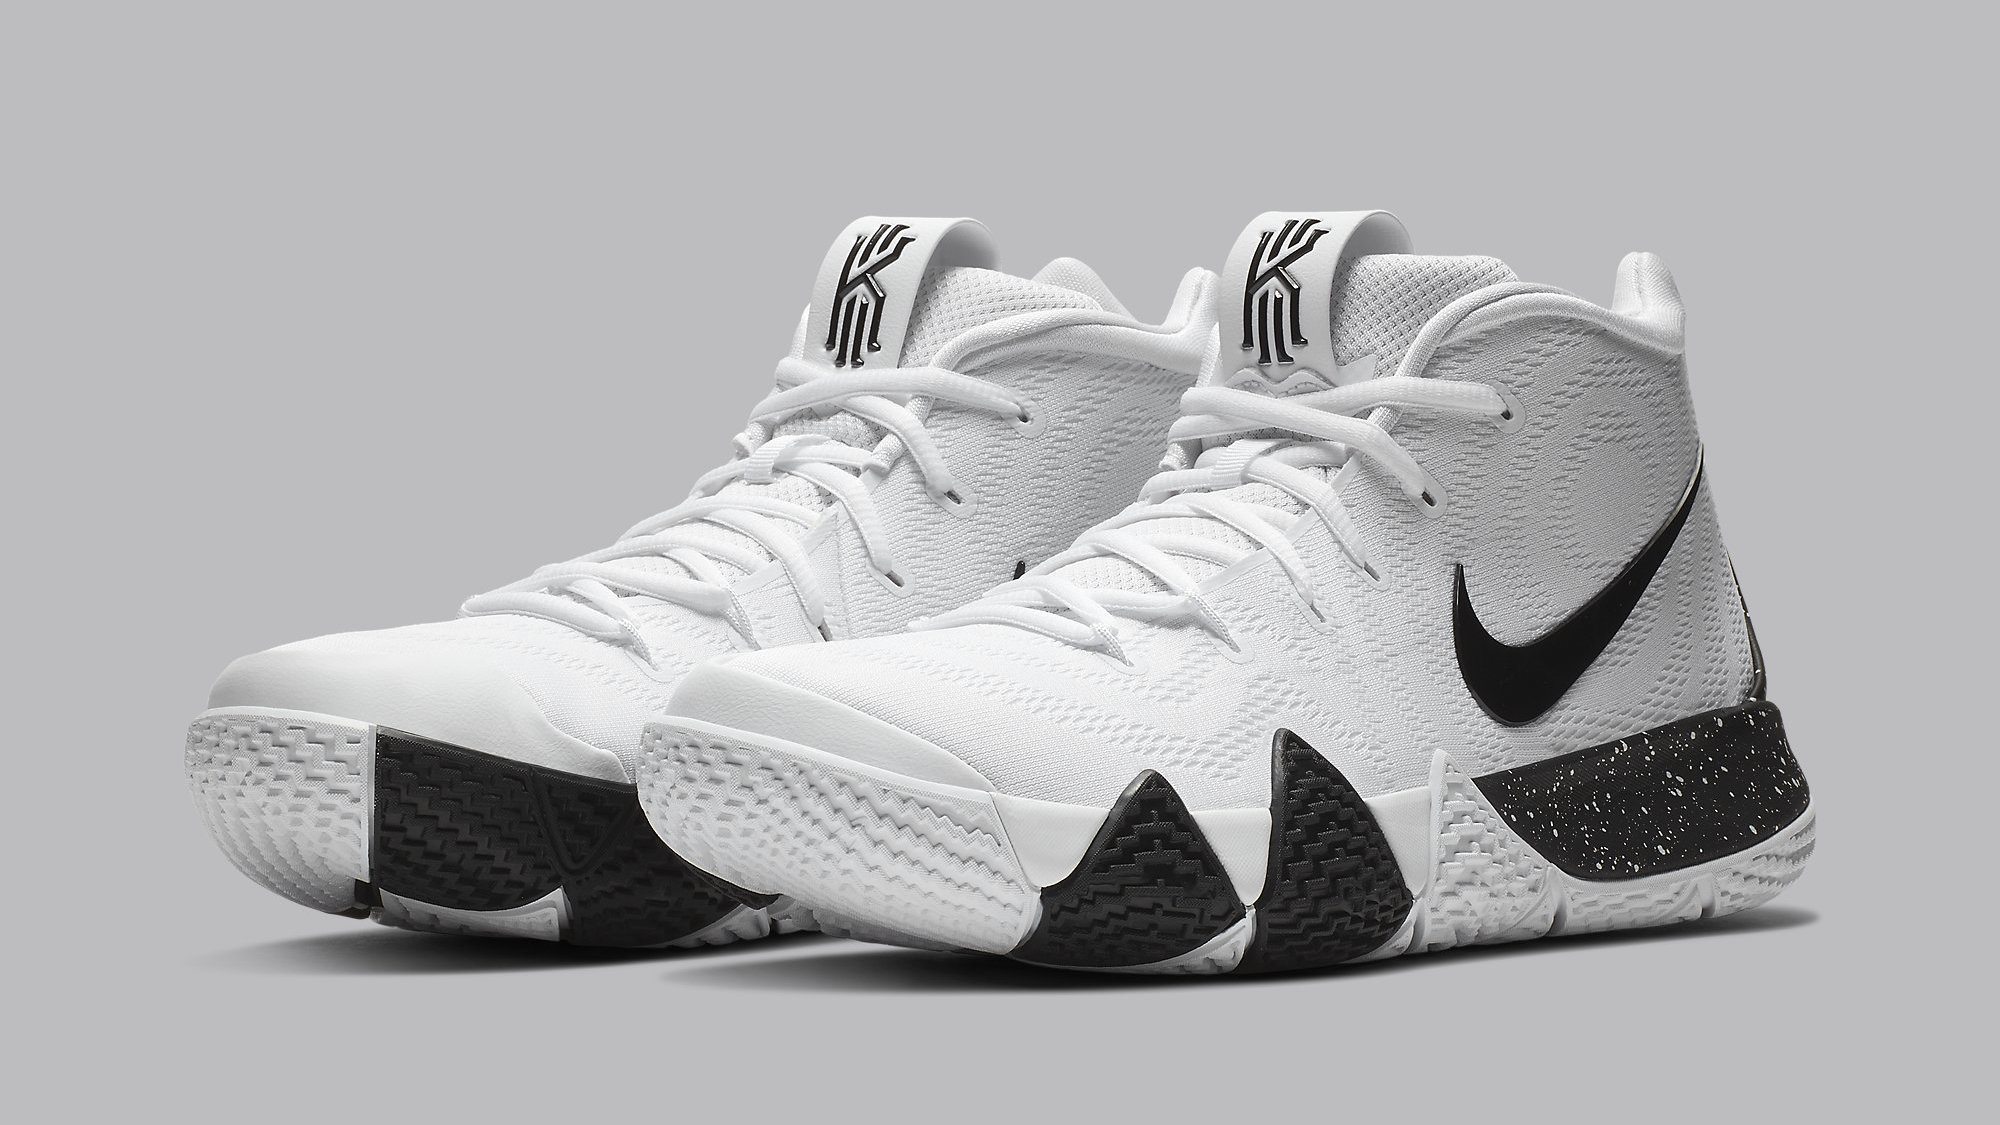 kyrie 4 white and black